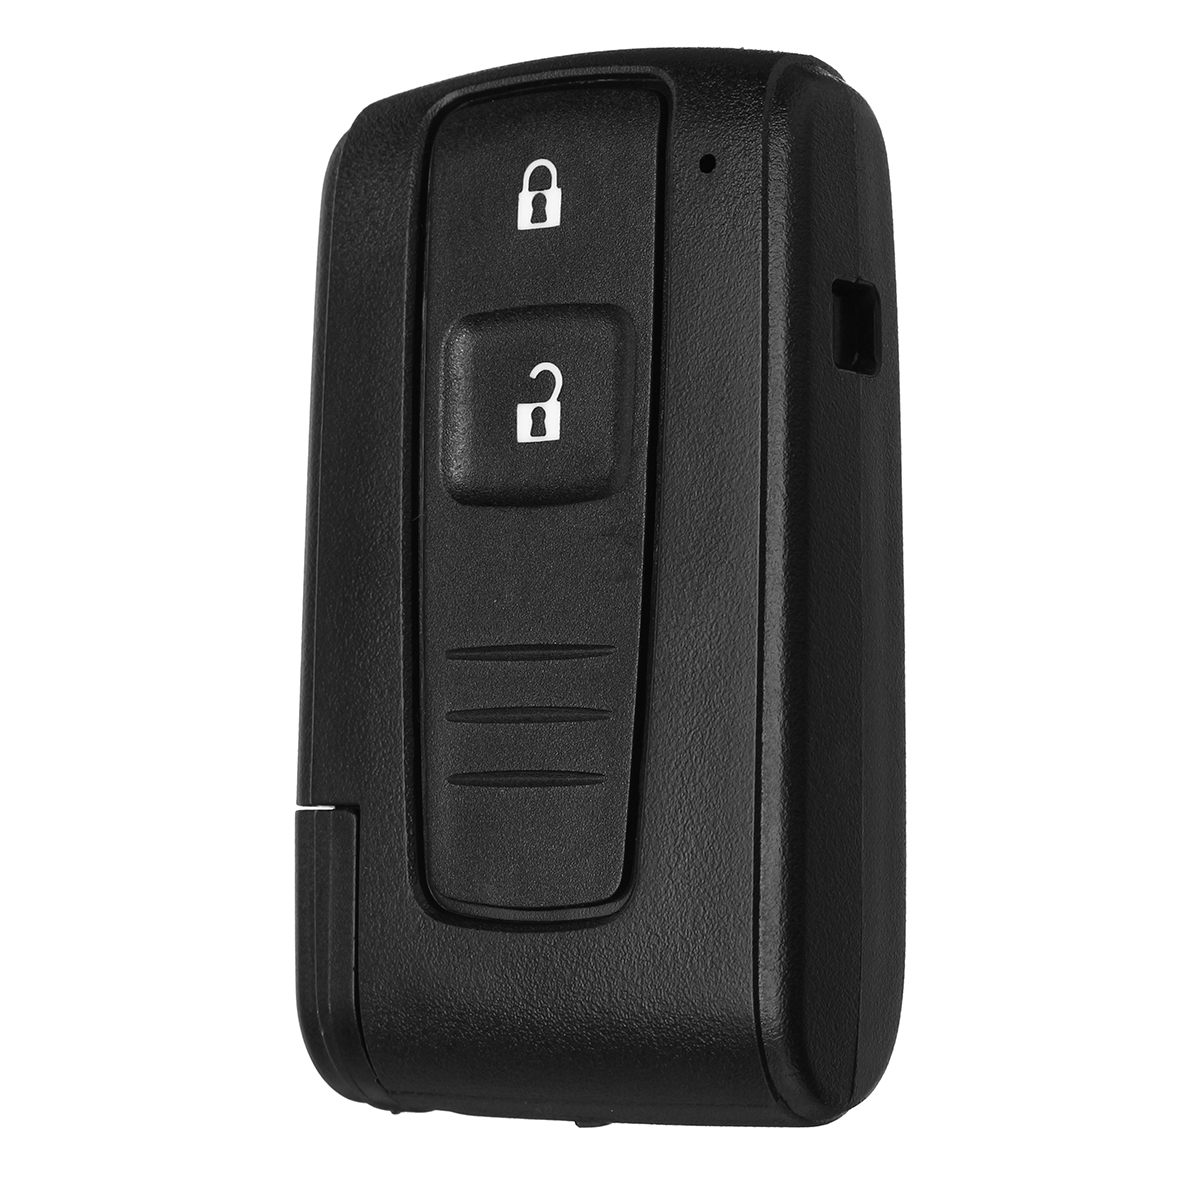 Car-Remote-Key-Fob-Case-With-Uncut-Blade-Battery-Kits-For-Toyota-Corolla-Verso-Prius-1261446